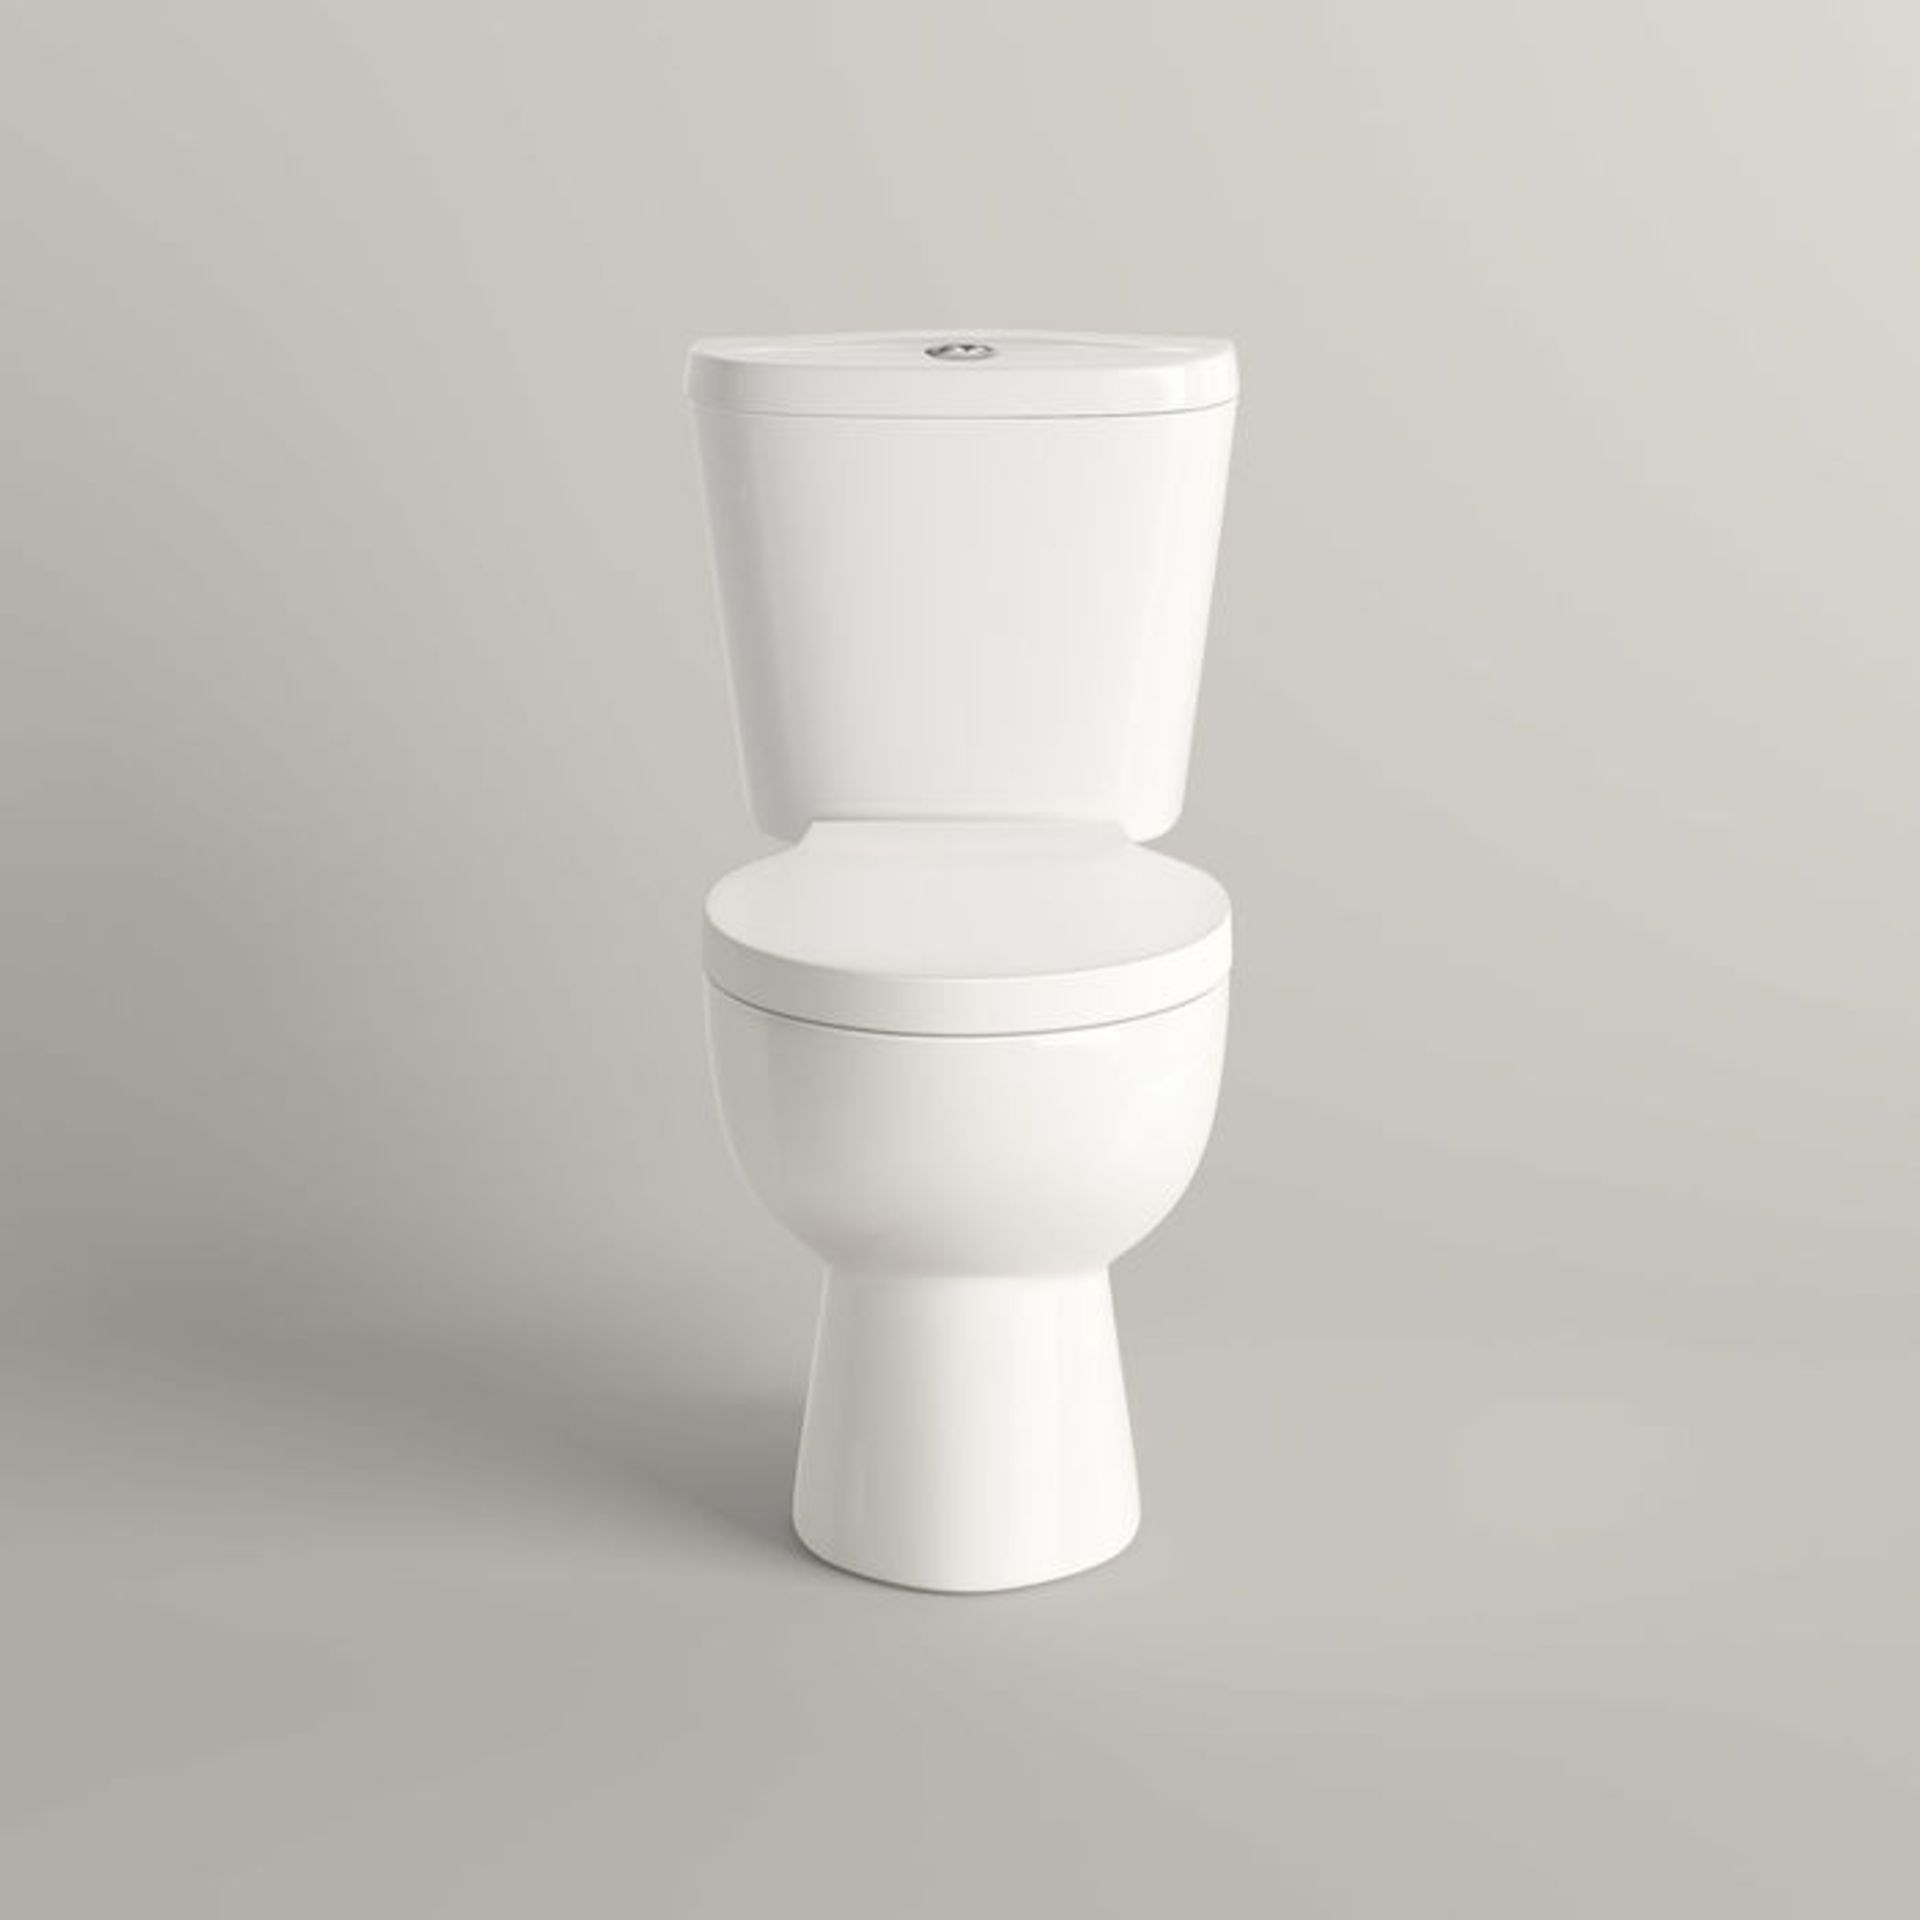 New Quartz Close Coupled Toilet.. We Love This Because It Is Simply Great Value! Made From Wh... - Image 3 of 3